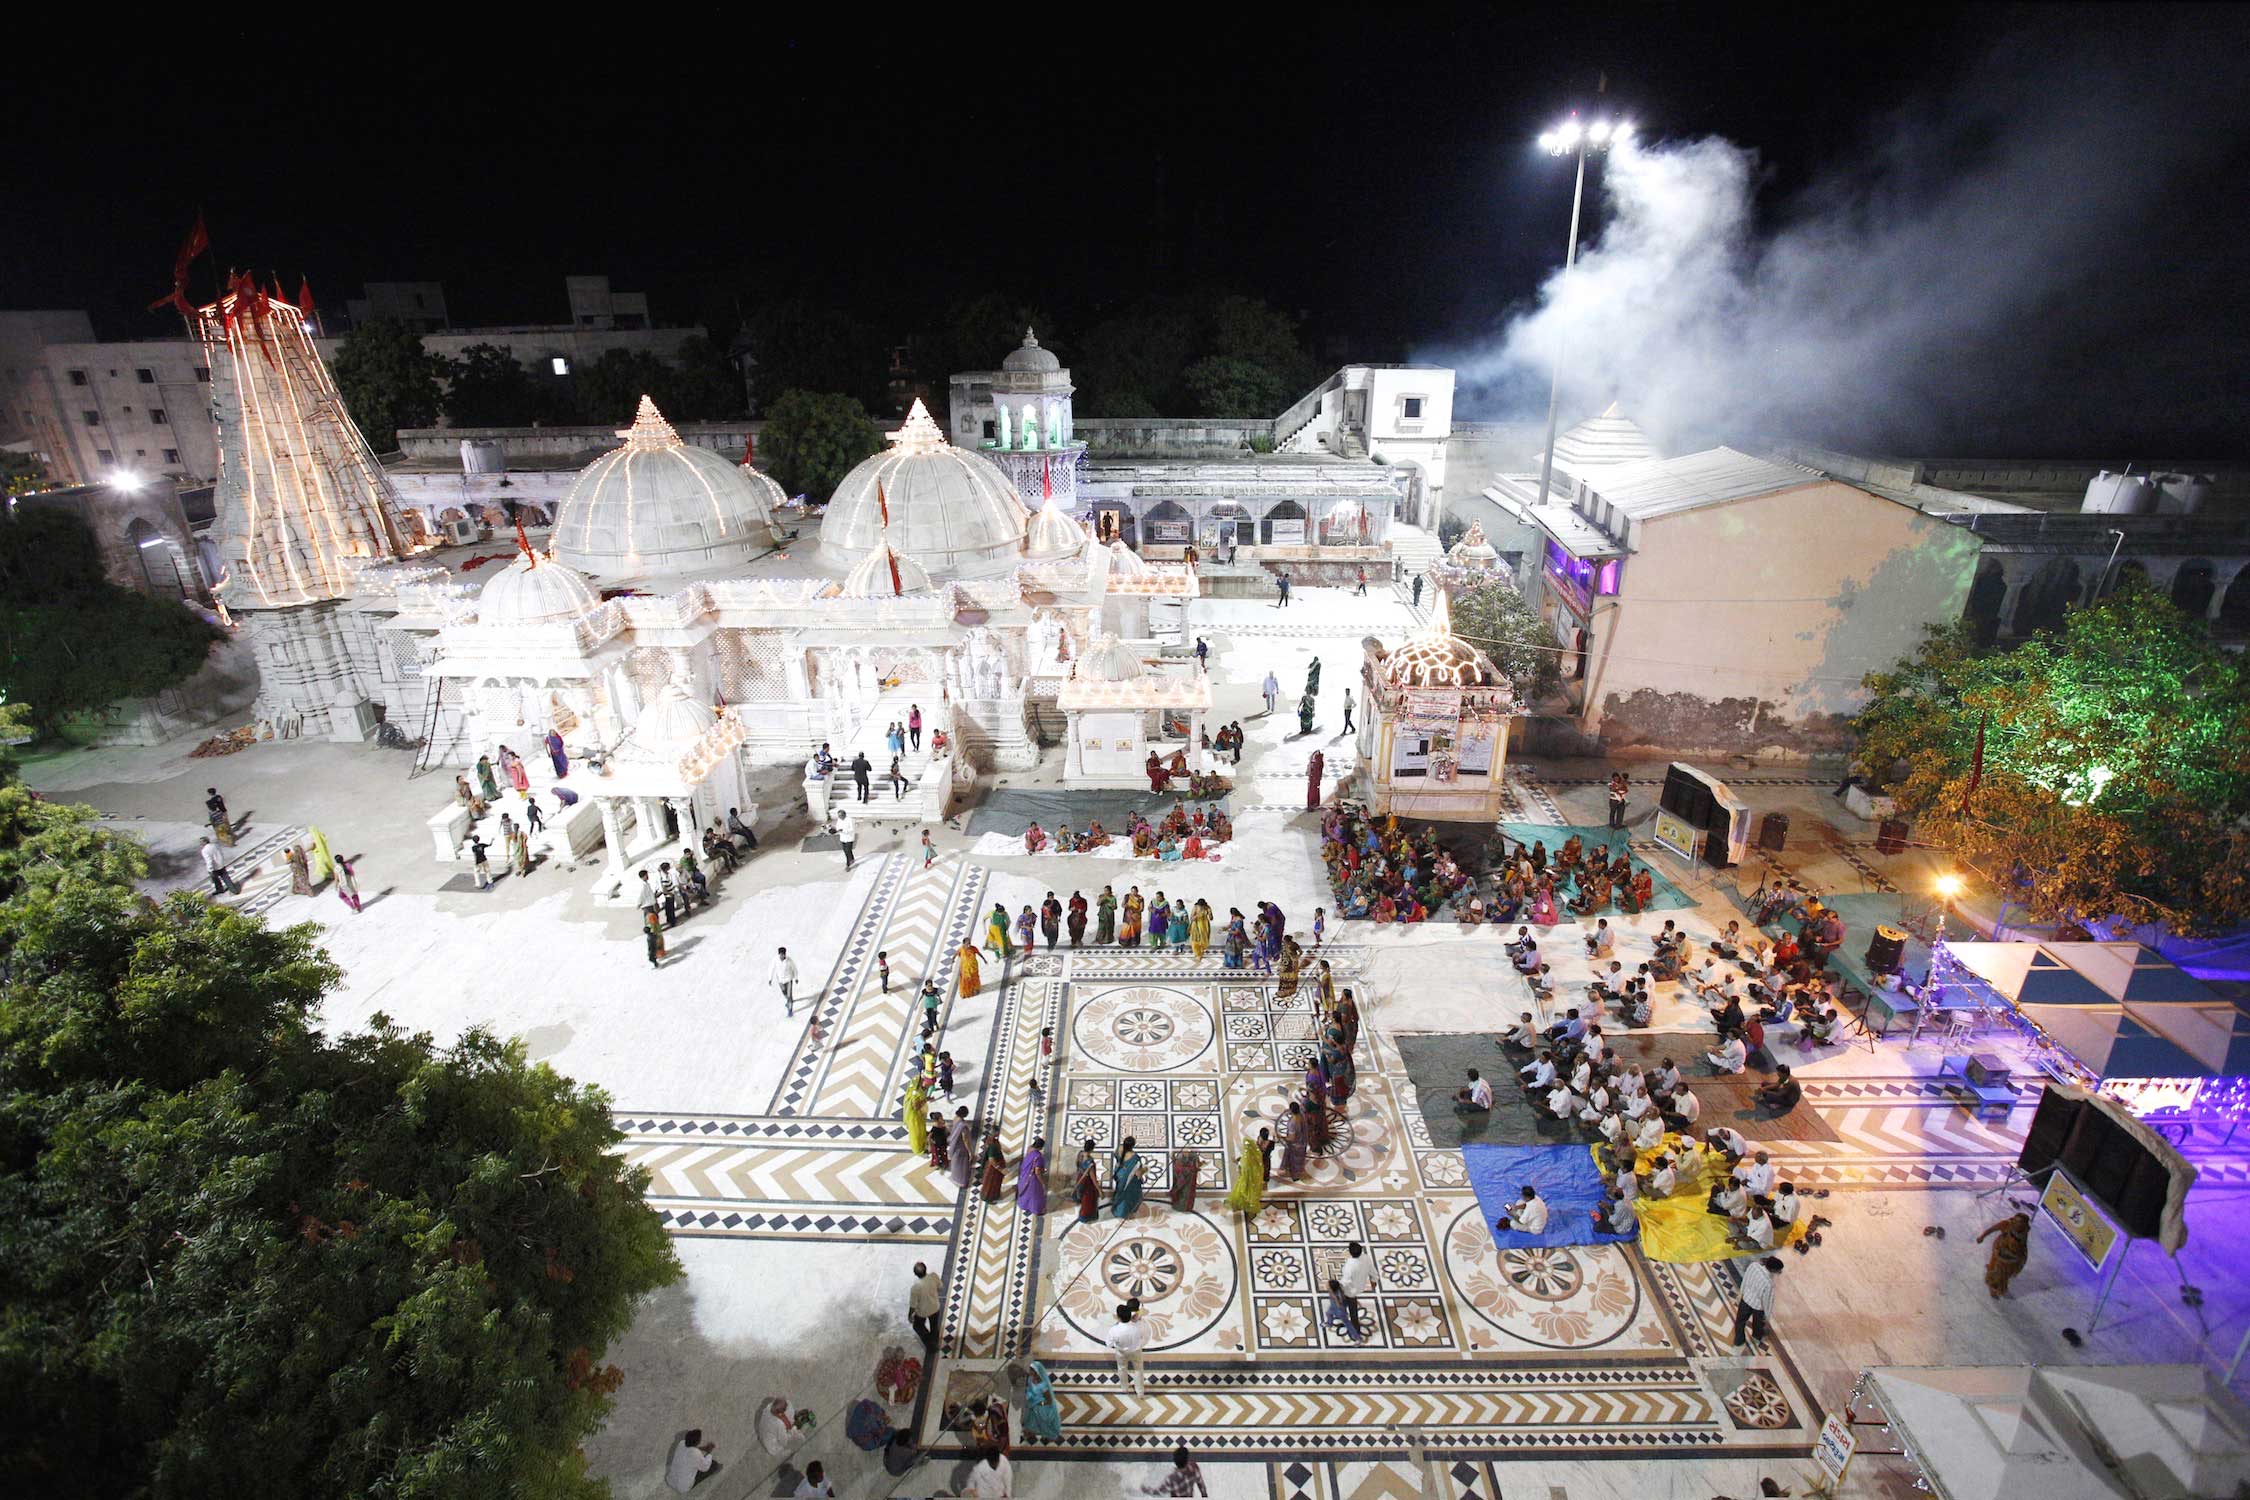 This temple in the north of Gujarat is entirely unknown. On the eighth day of Navratri, women perform the ritual circle dance as the men are watching. In the background pilgrims are making offerings in the temple, that is decorated for the celebration with thousands of LED lights. On the upper right corner holy smoke fills the temple area, from a fire-temple in which Ayurvedic ingredients are burnt in a huge lot.After long negotiations with the local priests, we were allowed to climb the temple roof and gates, of this ancient temple. This temple and celebration has never been documented to this extend before.